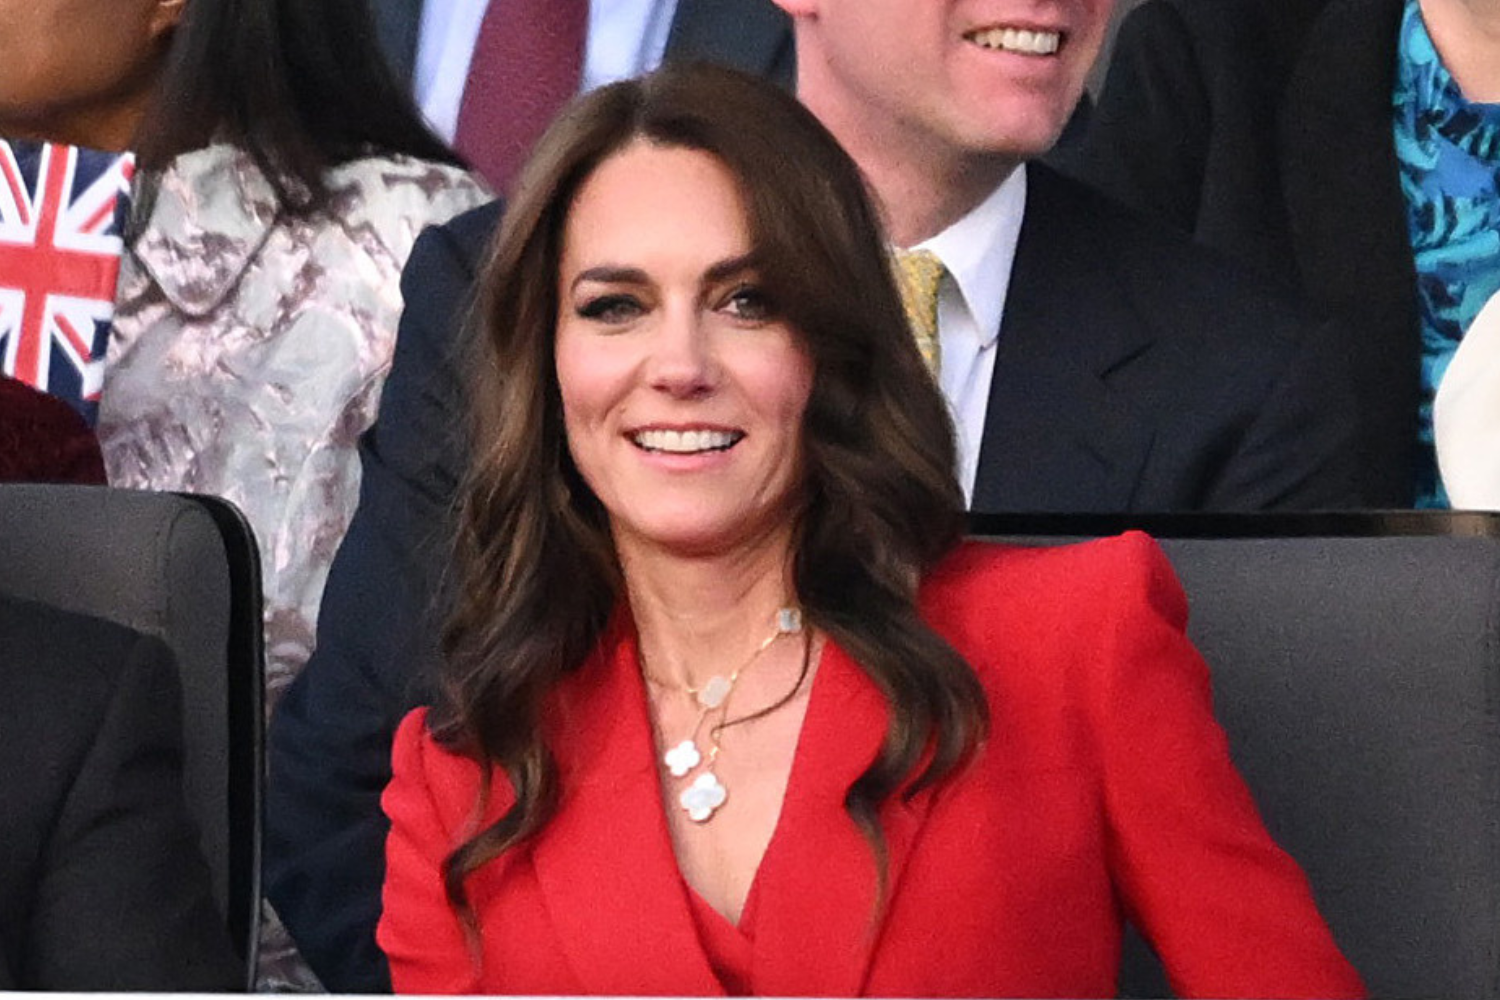 Get the Look: Kate Middleton's Red Royal Attire is the Ultimate Formal Fashion Inspiration 19